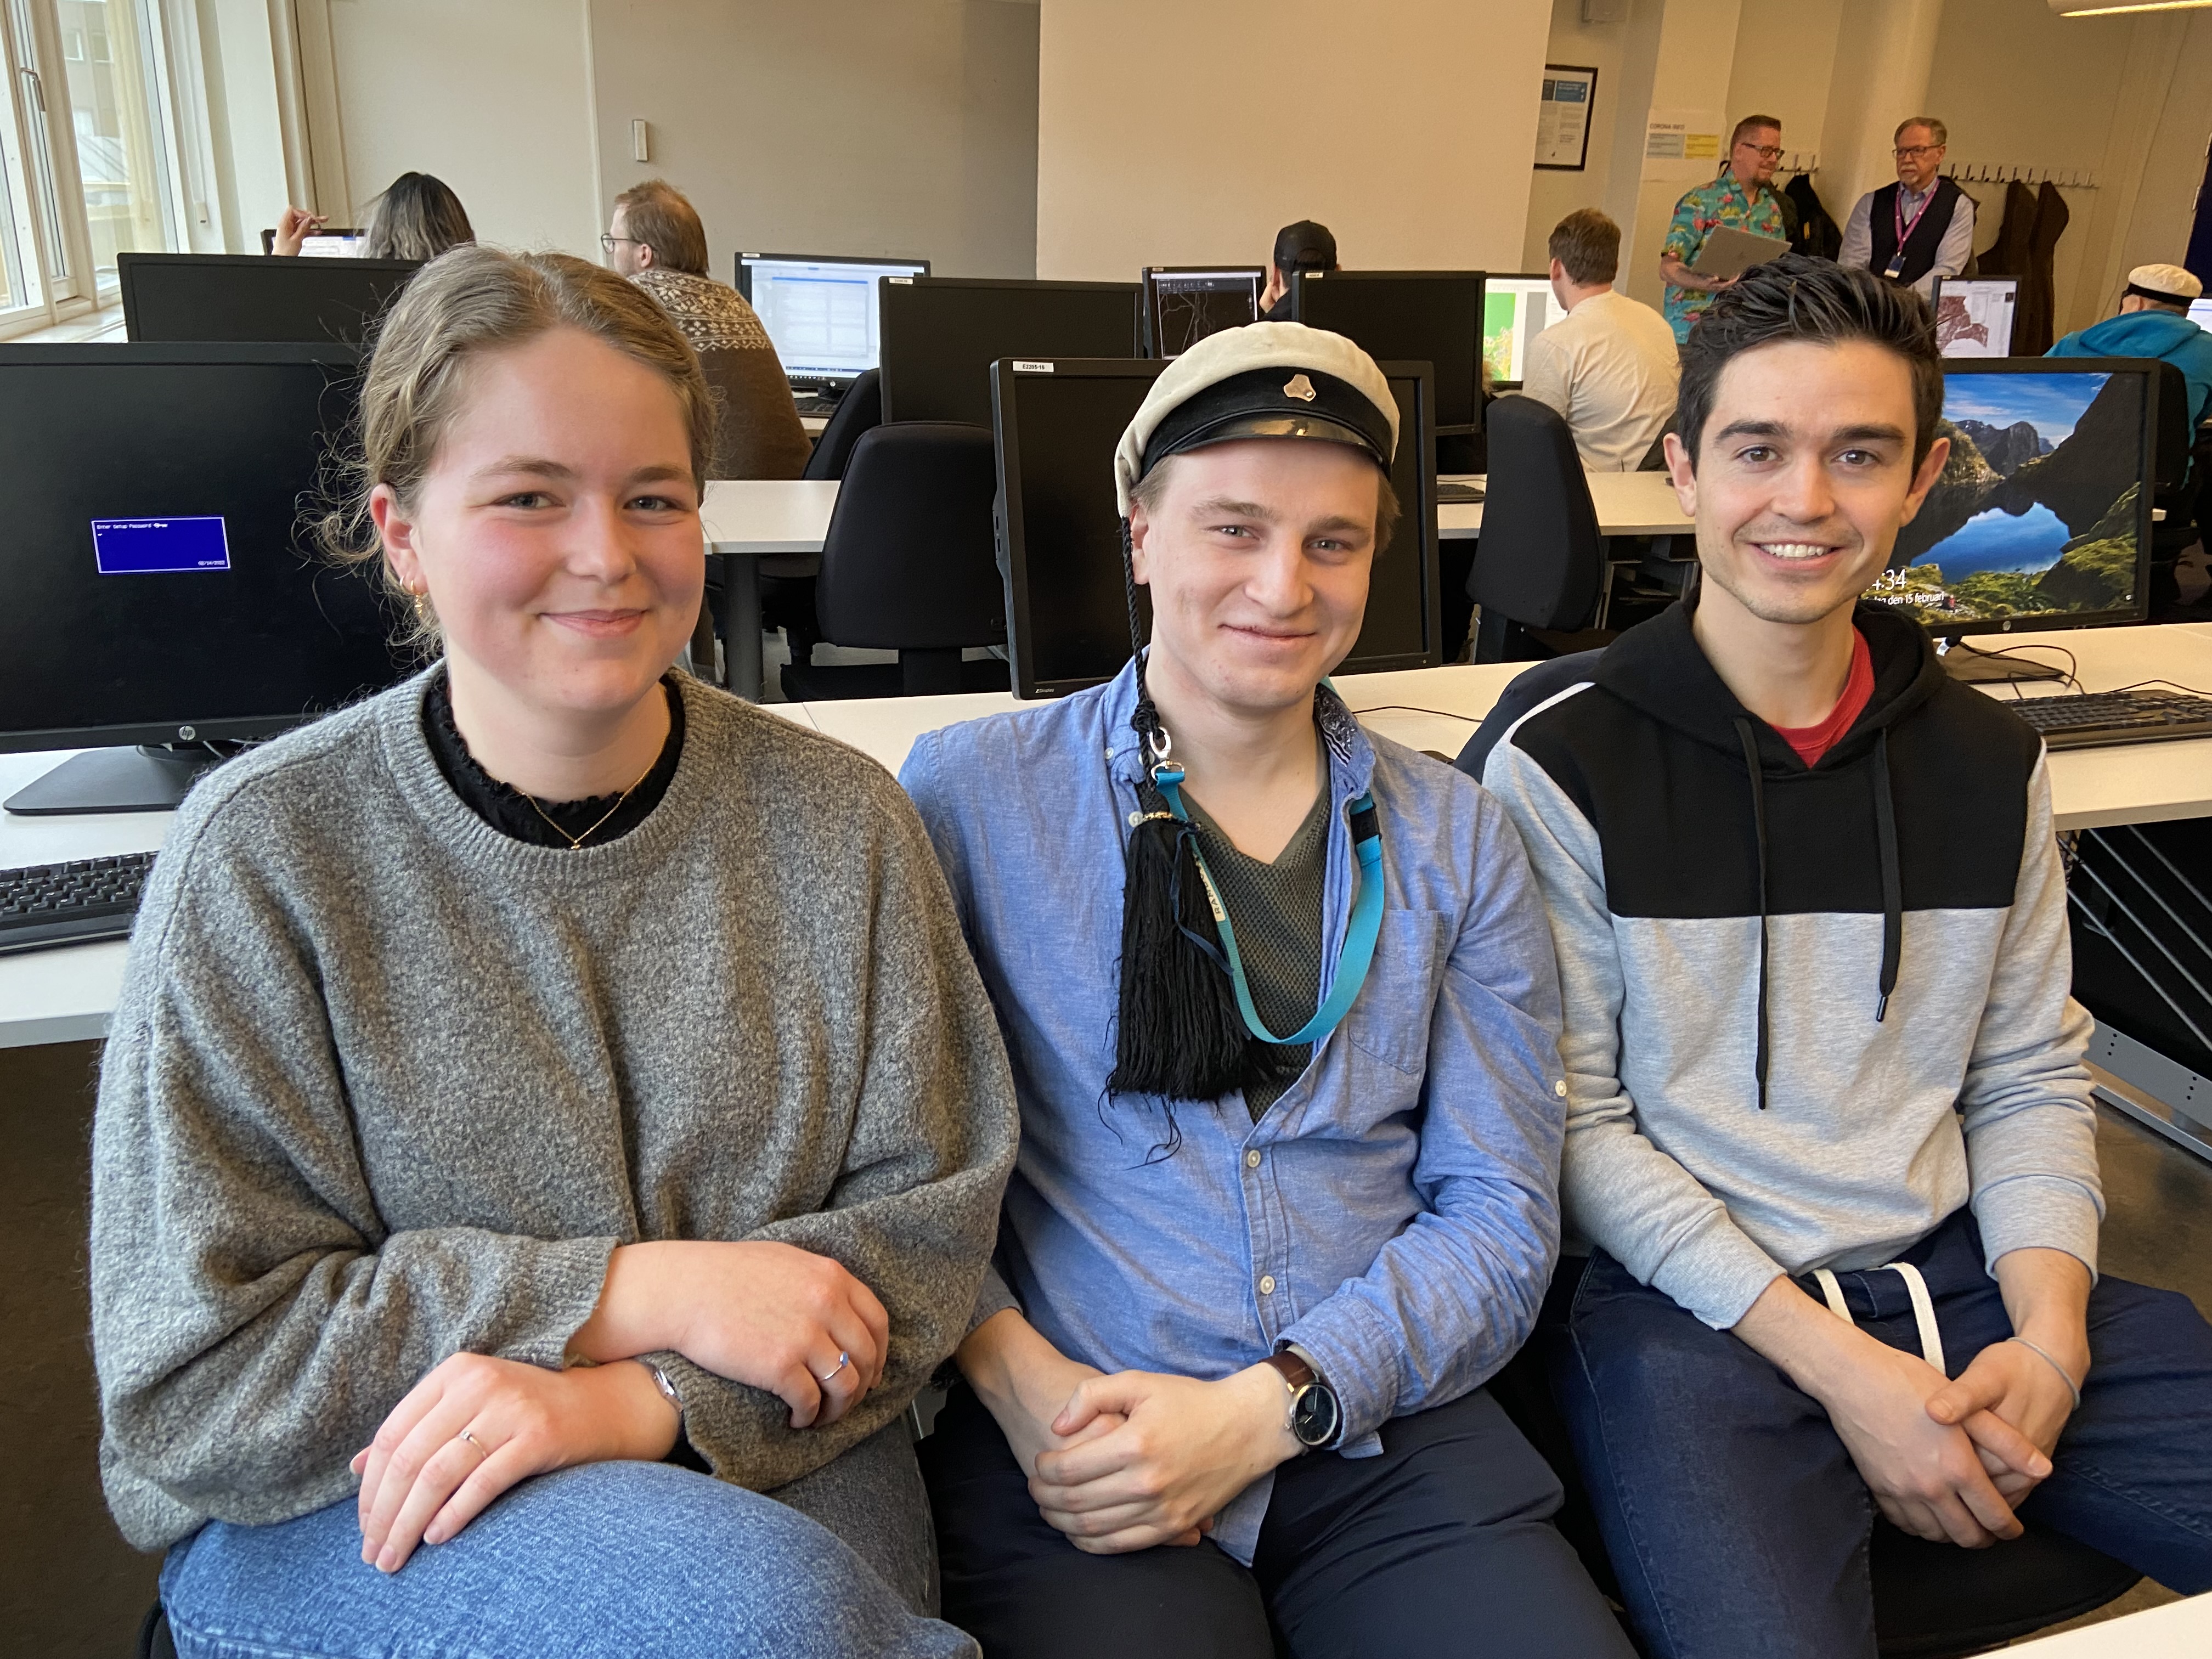 Students from universities in Scandinavia have a workshop at the University of Technology at Jönköping University.